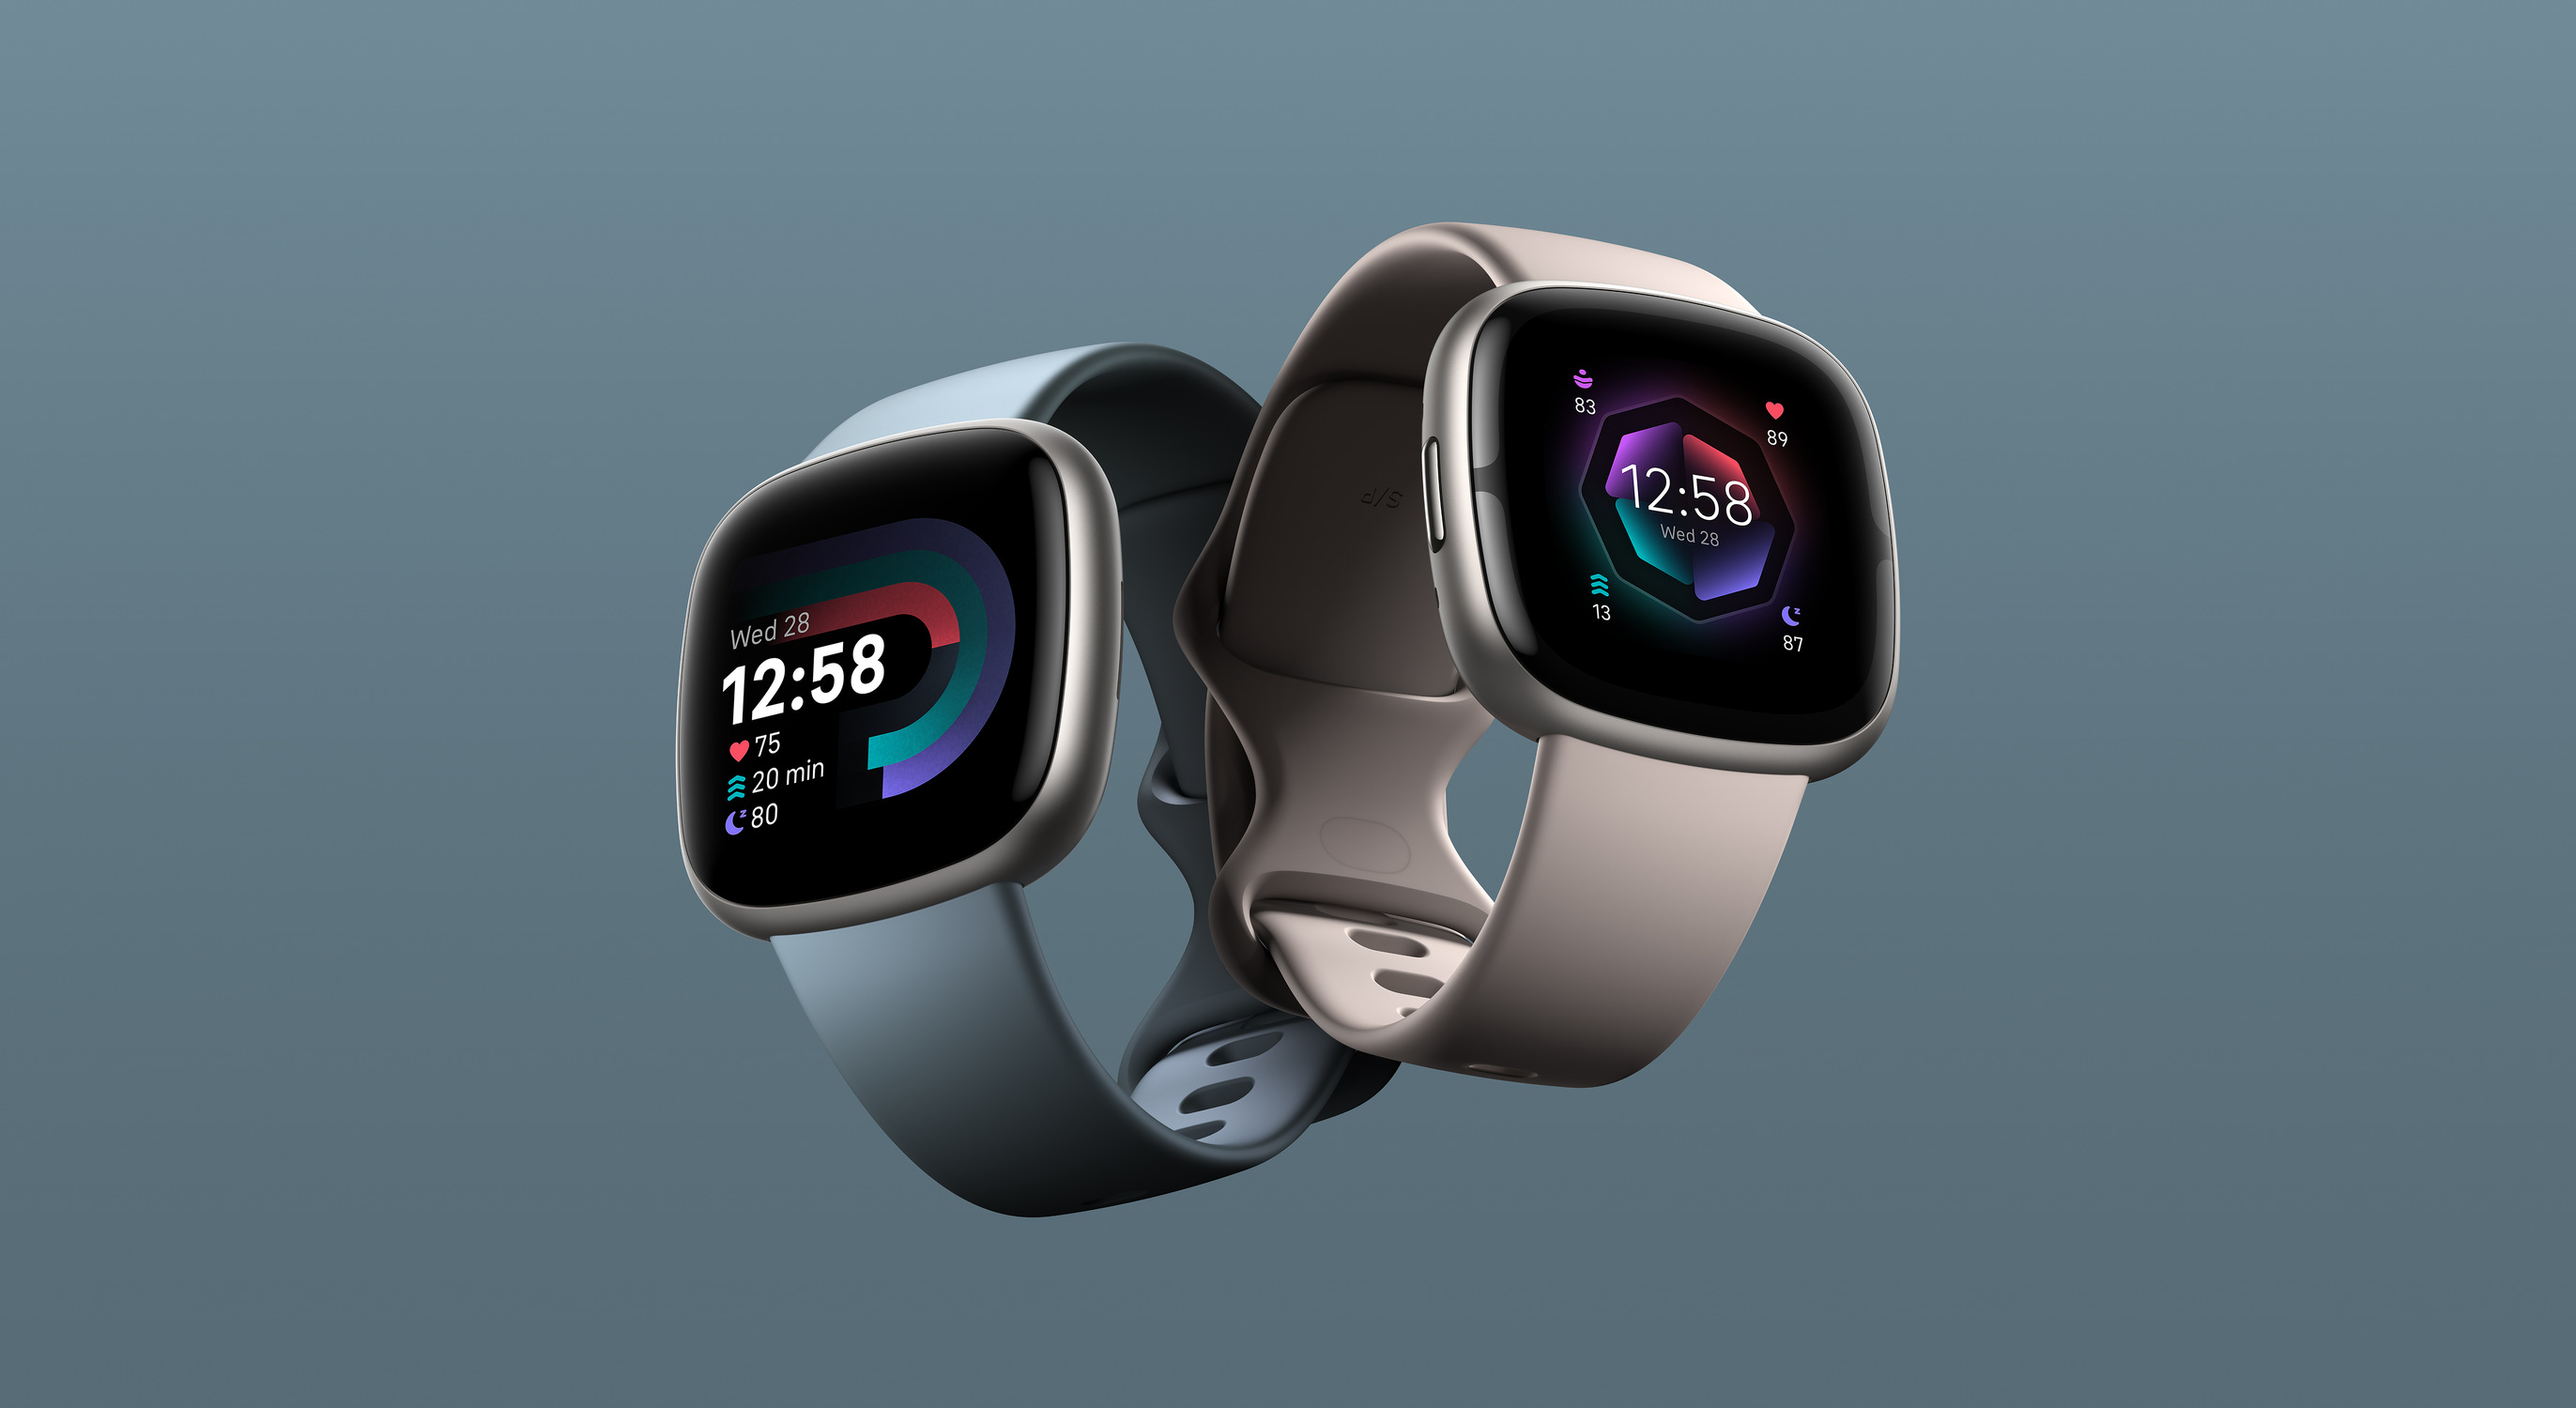 Versa Release Date: Exploring When Fitbit Versa Came Out